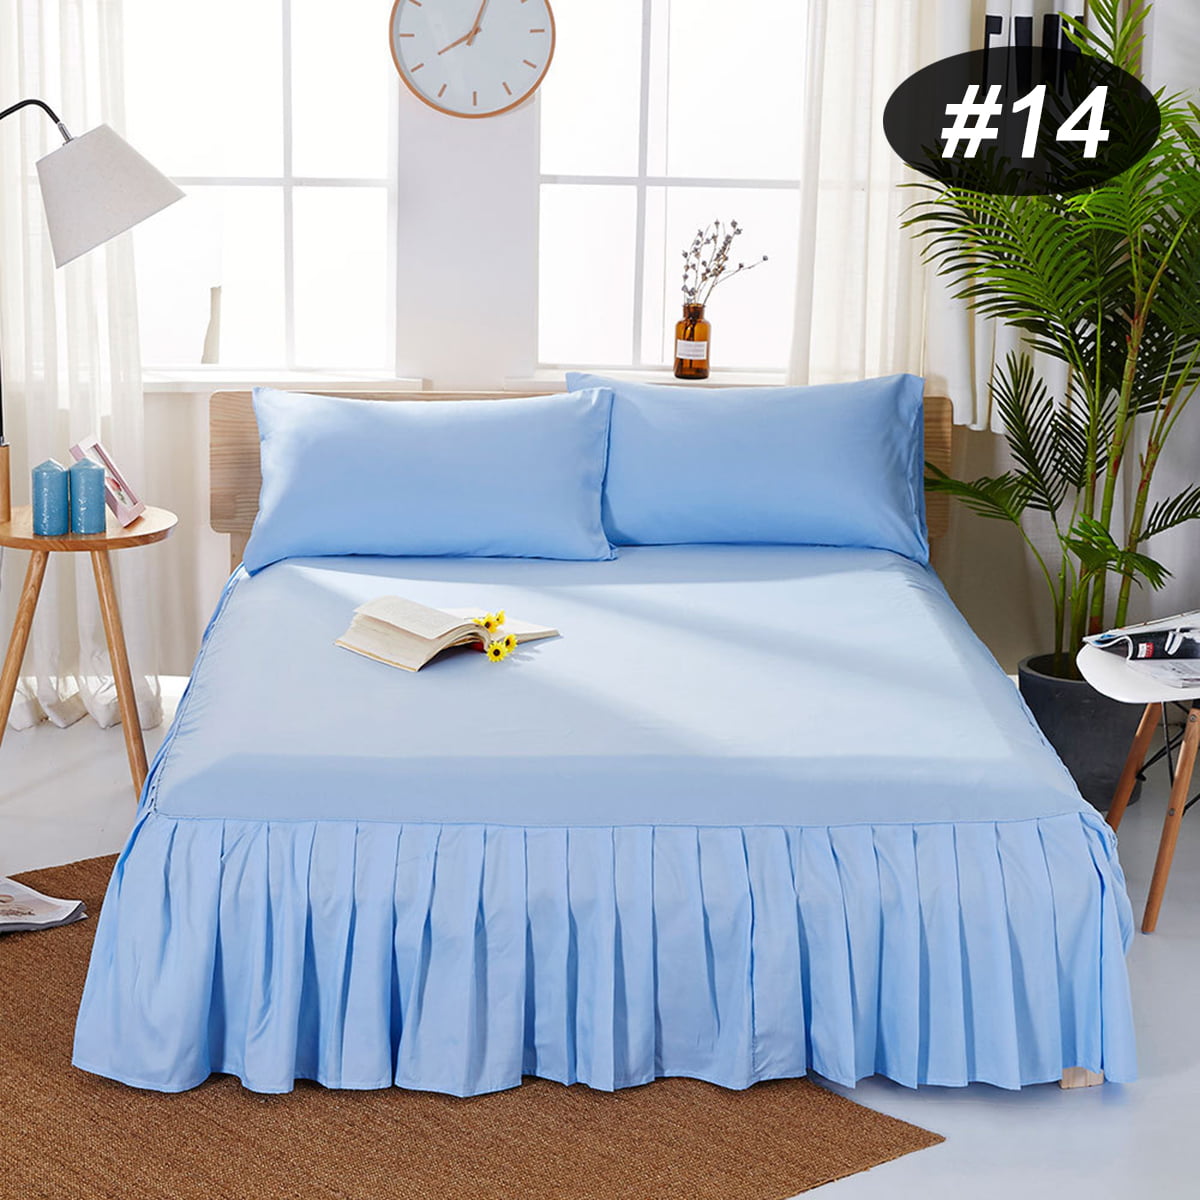 Polyester Bed Sheet Full Fitted Sheets Queen King Cover Bedding Bedspread Home 